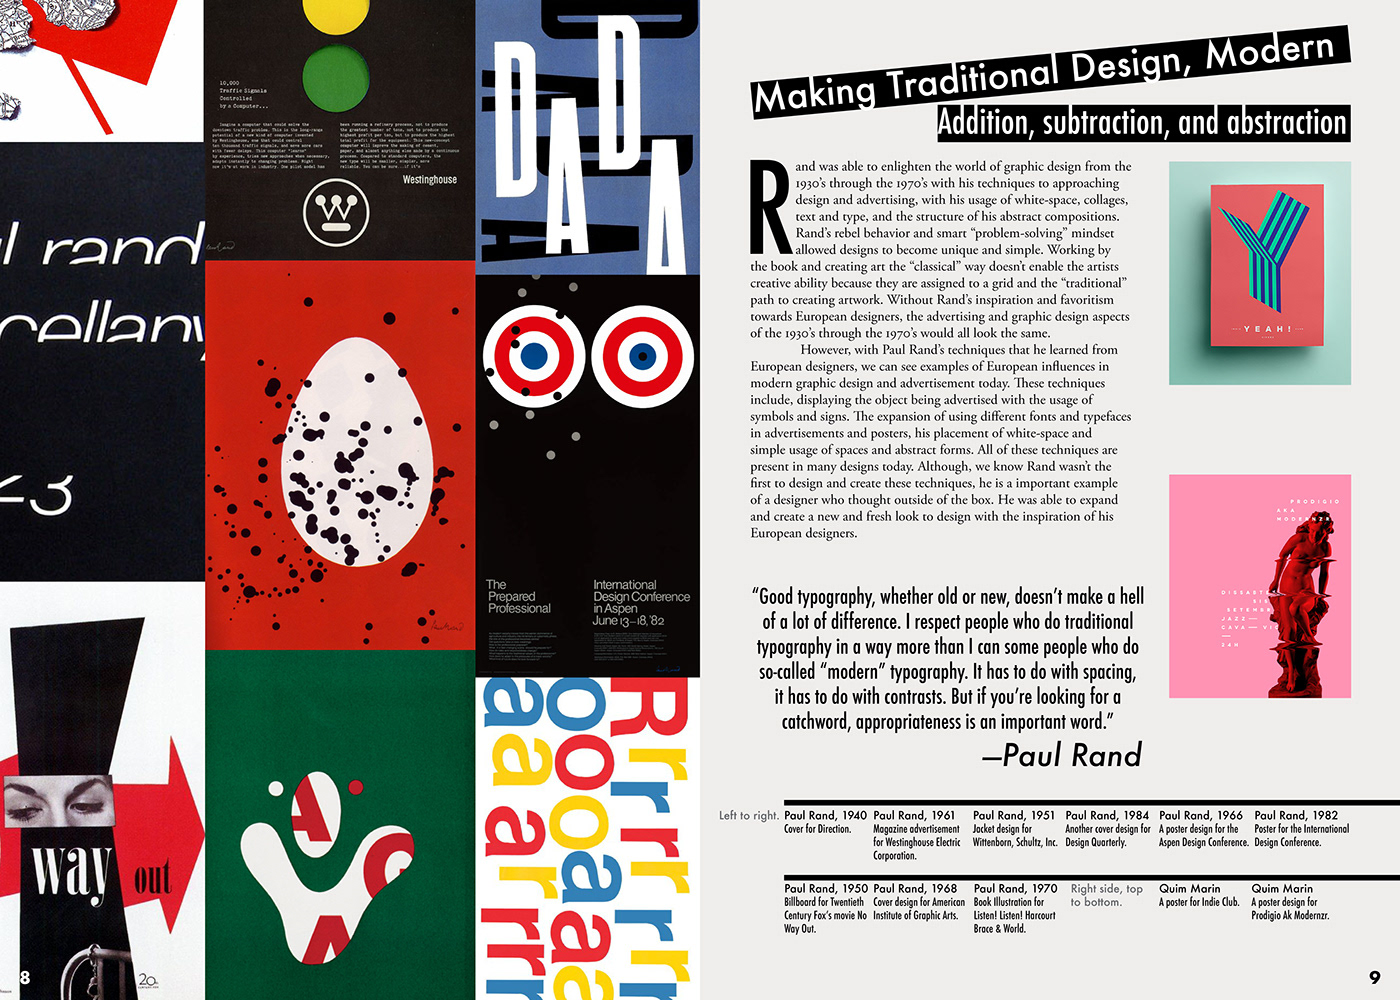 Paul Rand - How His Techniques Changed Graphic Design. on Behance1400 x 1000